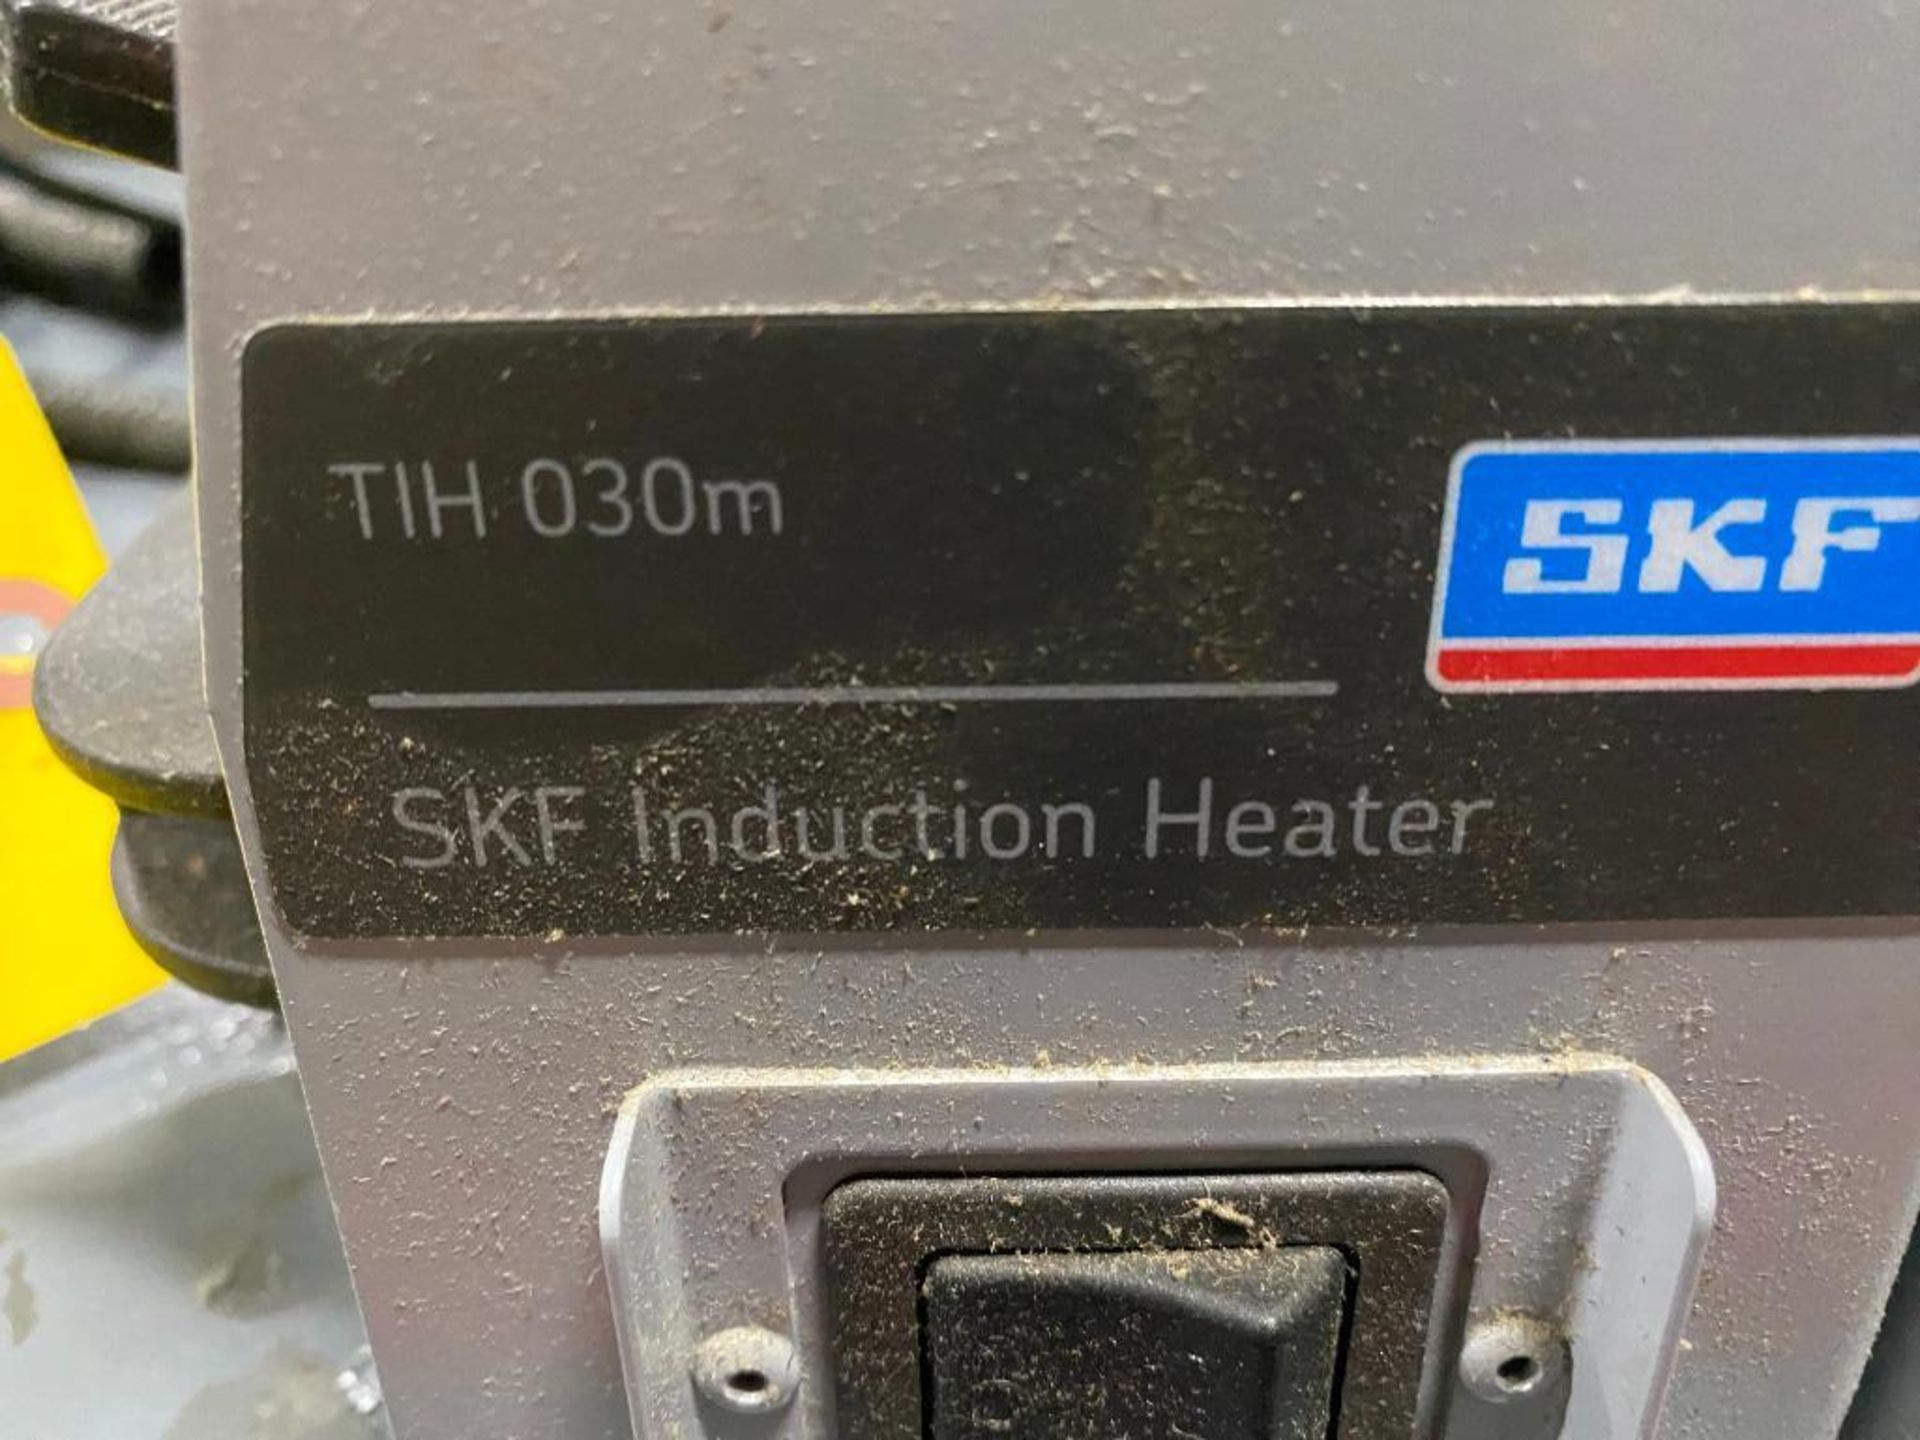 SKF Induction Bearing Heater, Model T1H030M, 110 V - Image 2 of 2